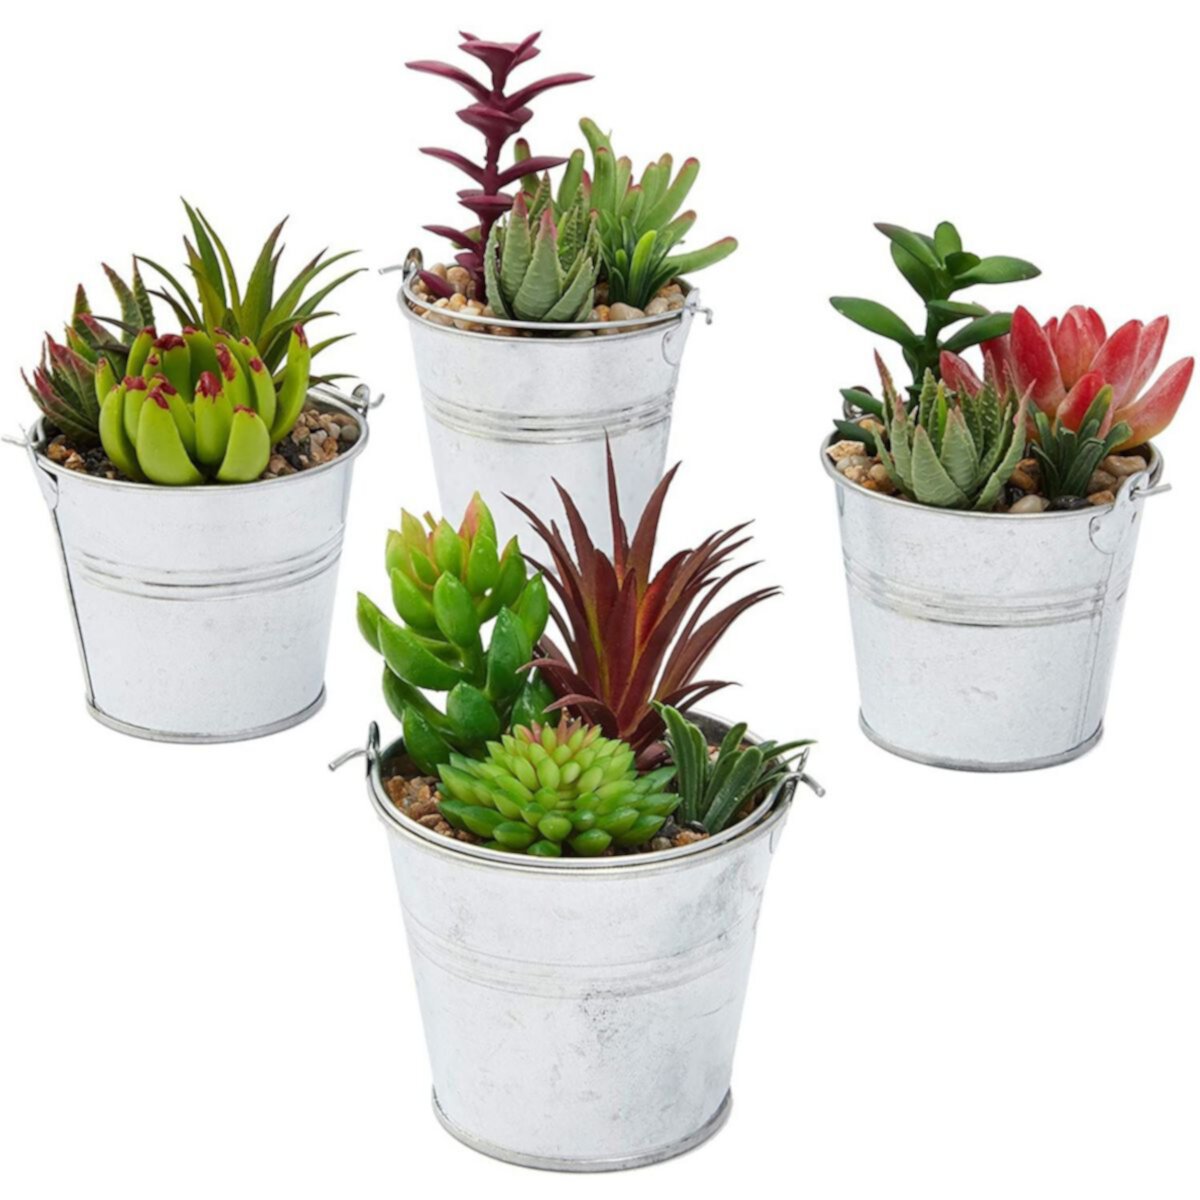 Juvale 4 Pack Artificial Succulents, 6.5 inch Colorful Fake Cactus Plants with Iron Bucket Juvale